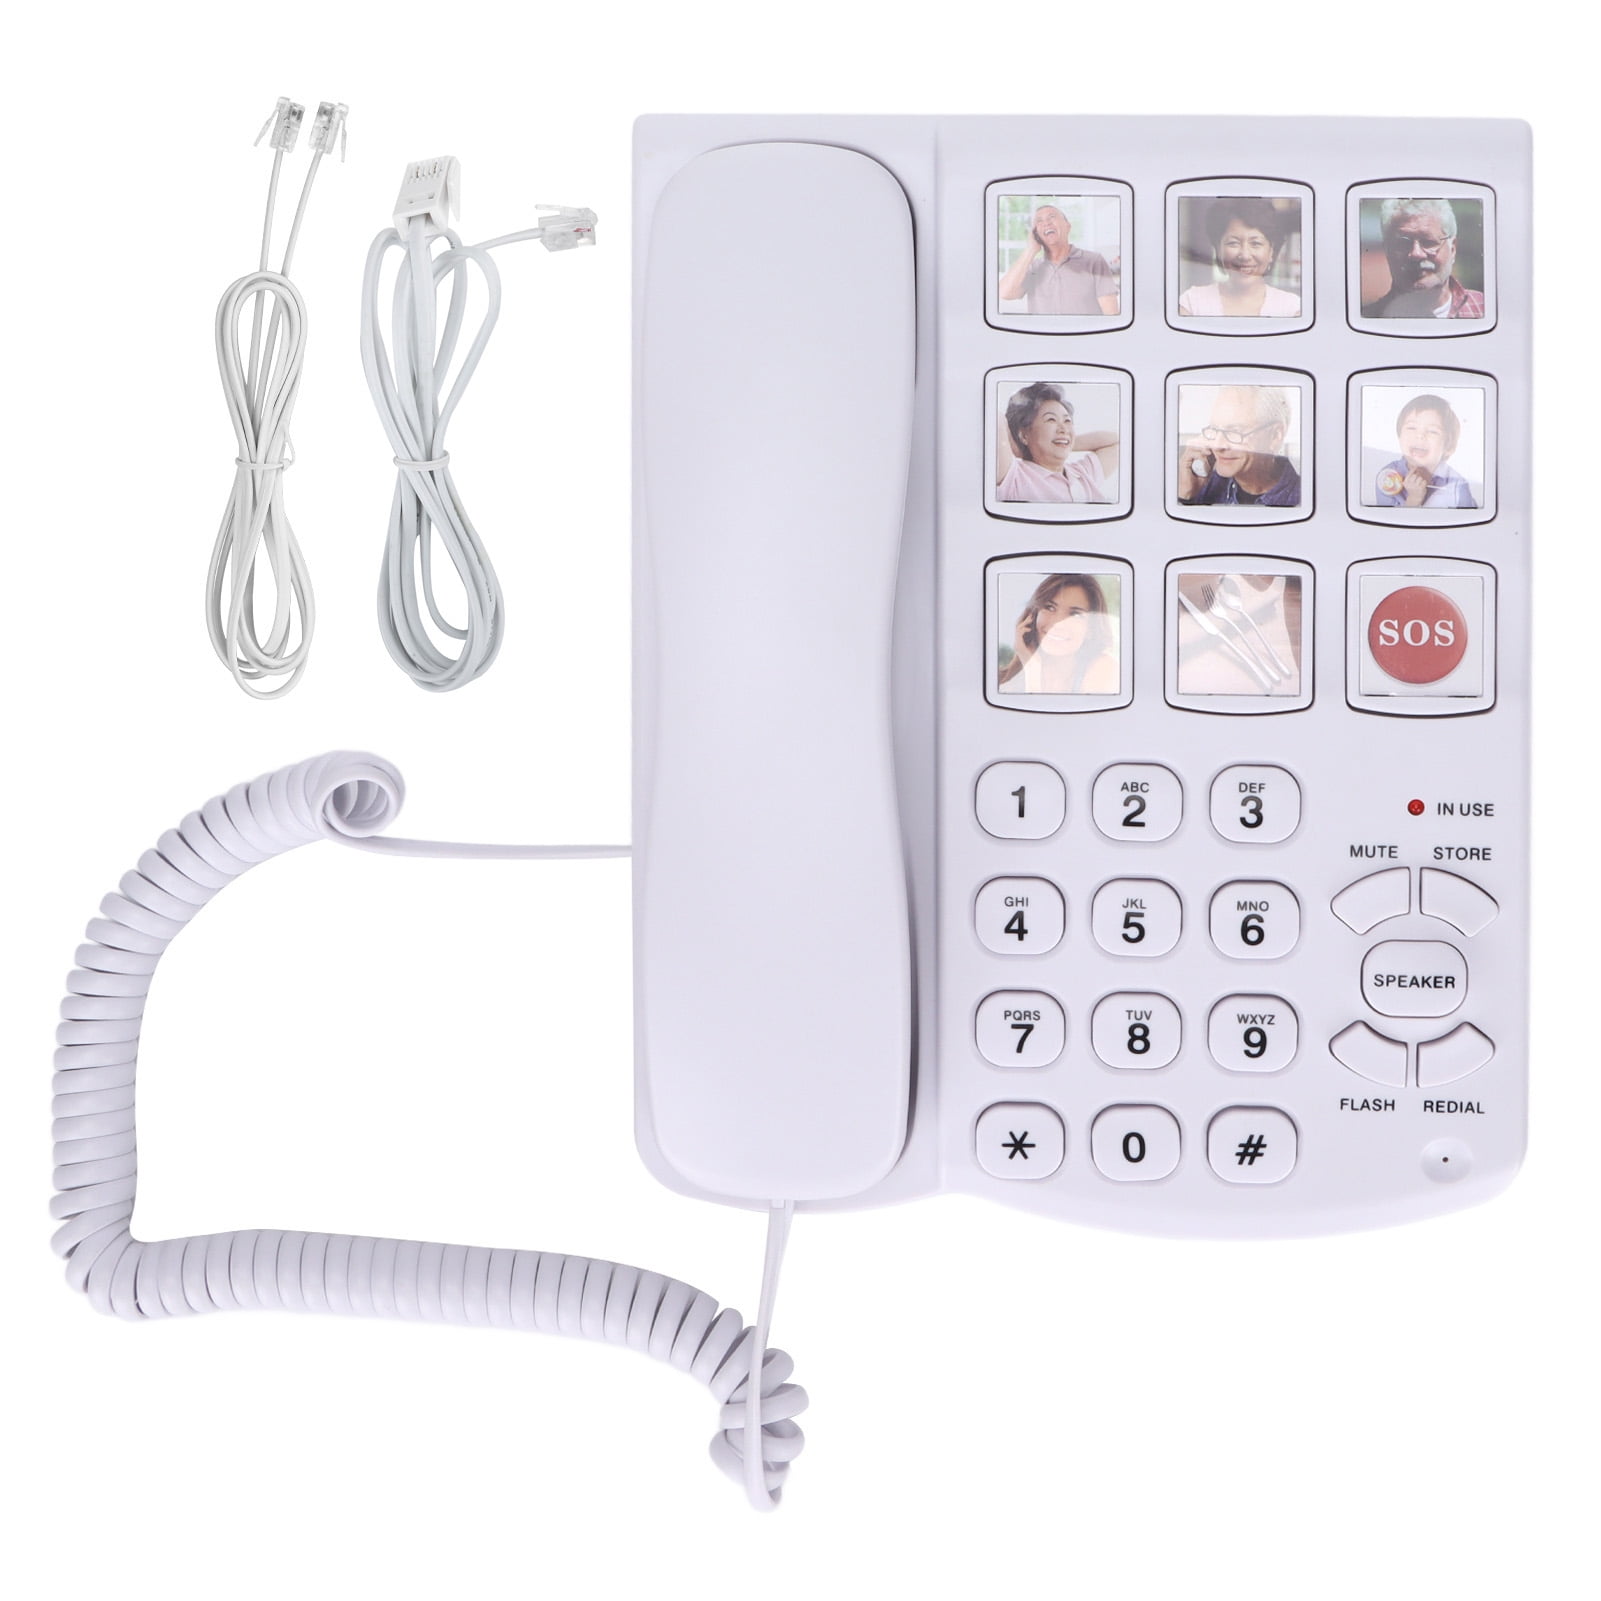  Big Button Phones for Seniors - Large Buttons for Visually  Impaired Phone, 80dB+ Handset Volume for The Hearing Impaired, Elderly  Phone for Seniors, Alzheimer's, Dementia - Landline Phone for Seniors 